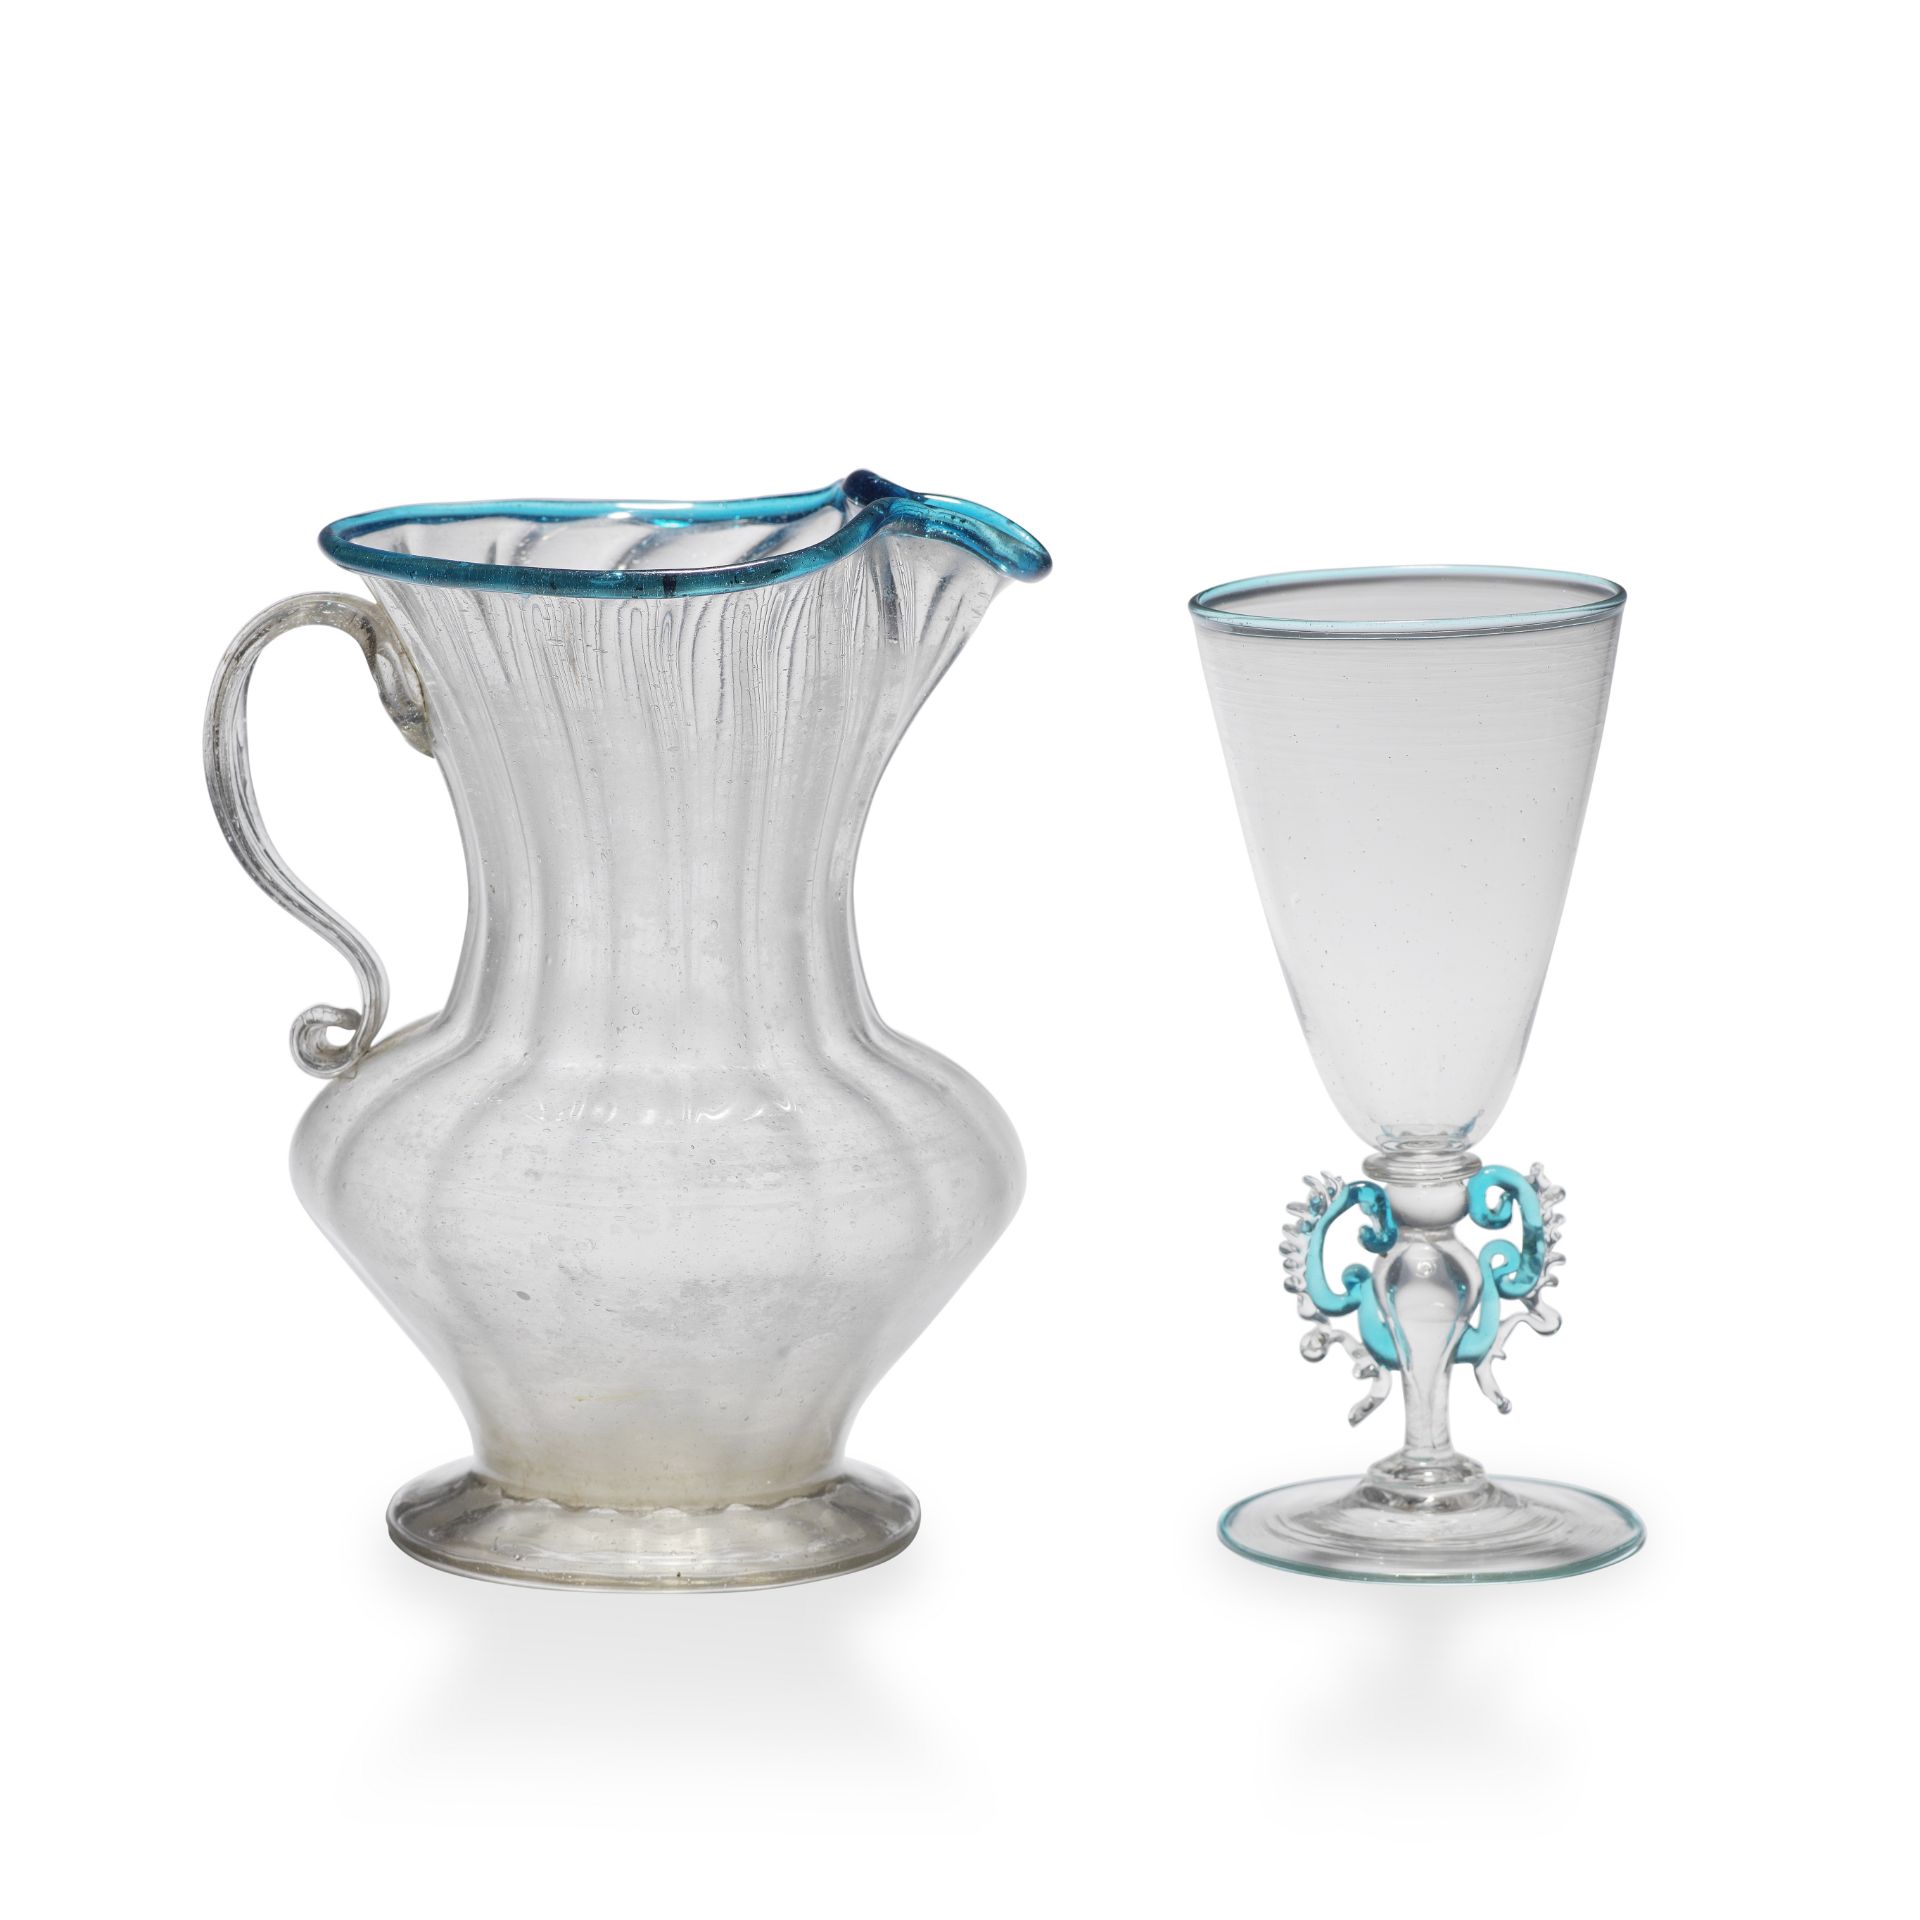 A fa&#231;on de Venise jug, 17th century, and a winged wine glass, late 19th century